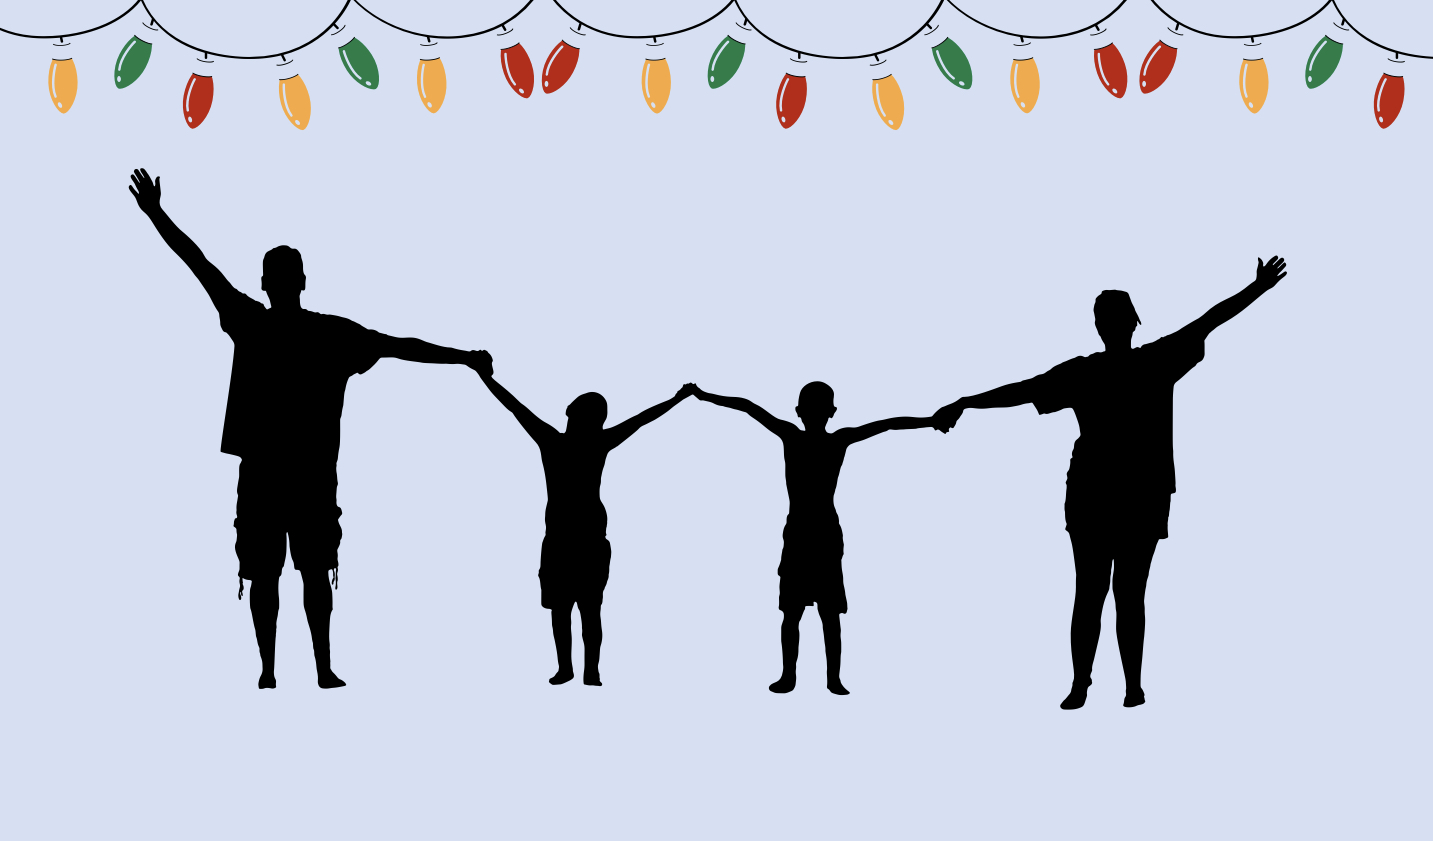 Opinion: The importance of giving back during the holidays